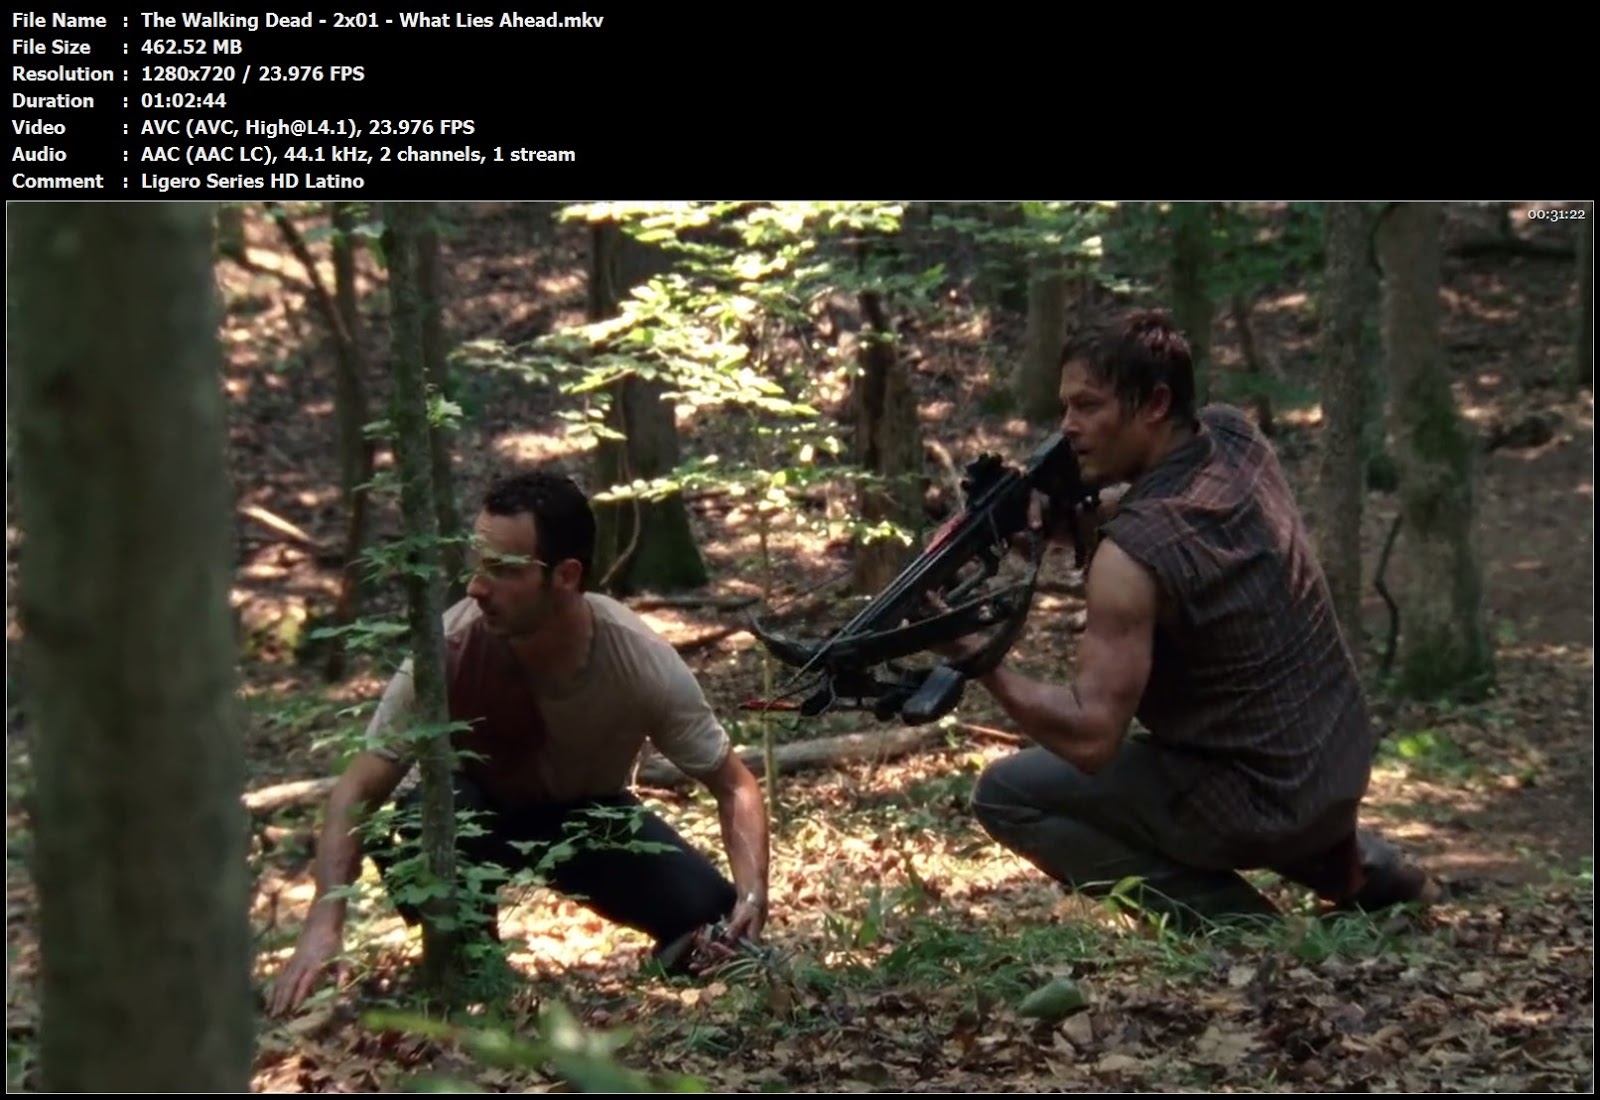 The Walking Dead (2010) Serie Completa 720p Latino The%2BWalking%2BDead%2B-%2B2x01%2B-%2BWhat%2BLies%2BAhead.mkv